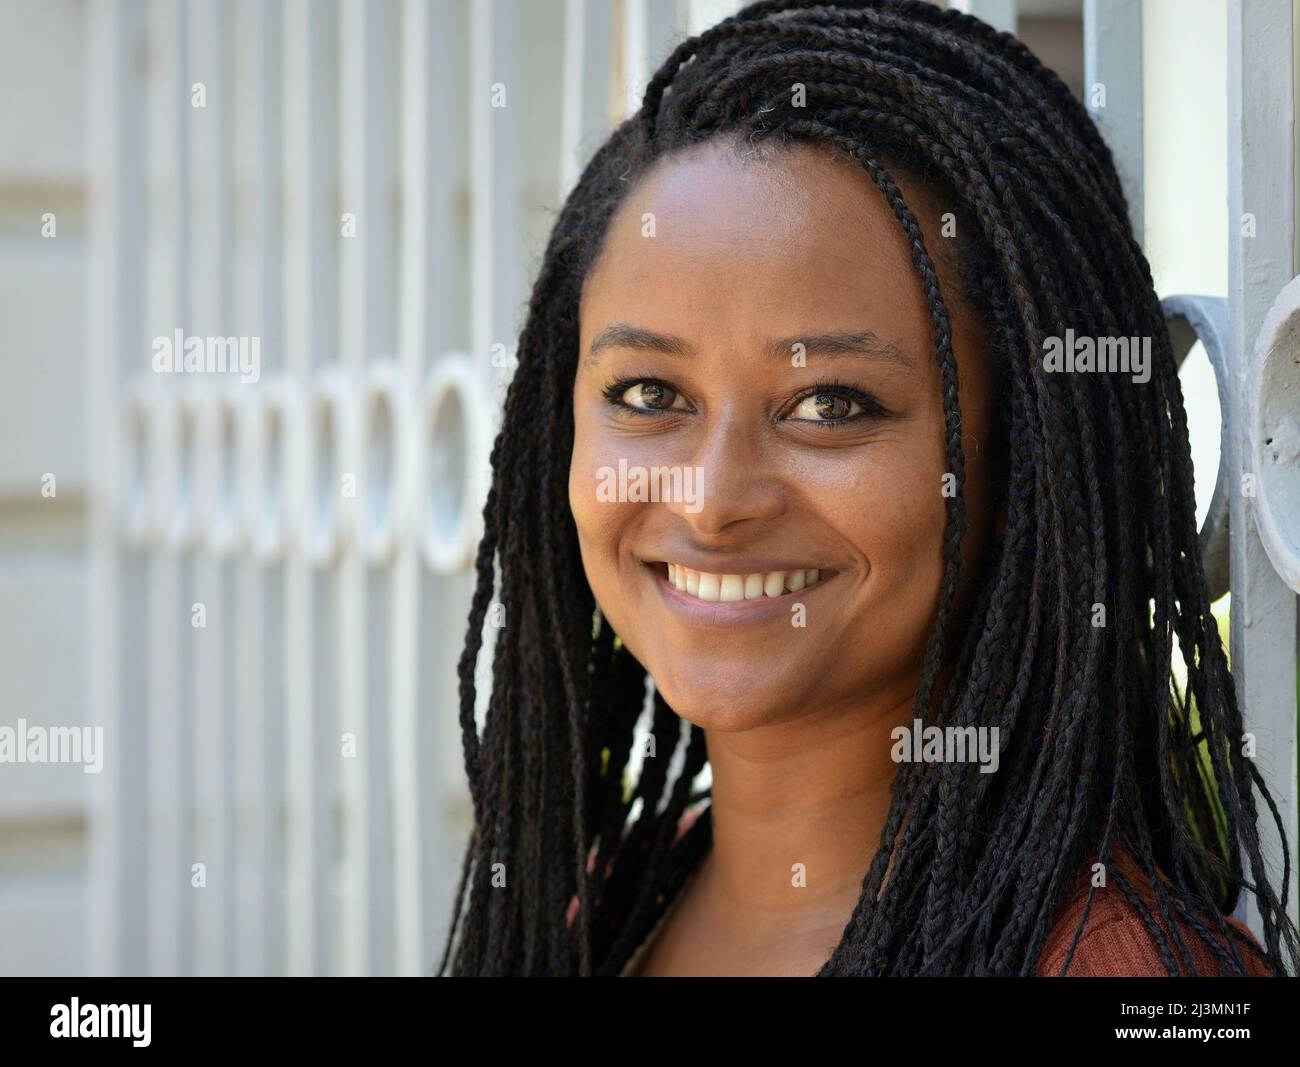 Cheerful positive beautiful young dark skinned African woman with long stylish Afro braids smiles for the viewer in front of a wrought iron fence. Stock Photo